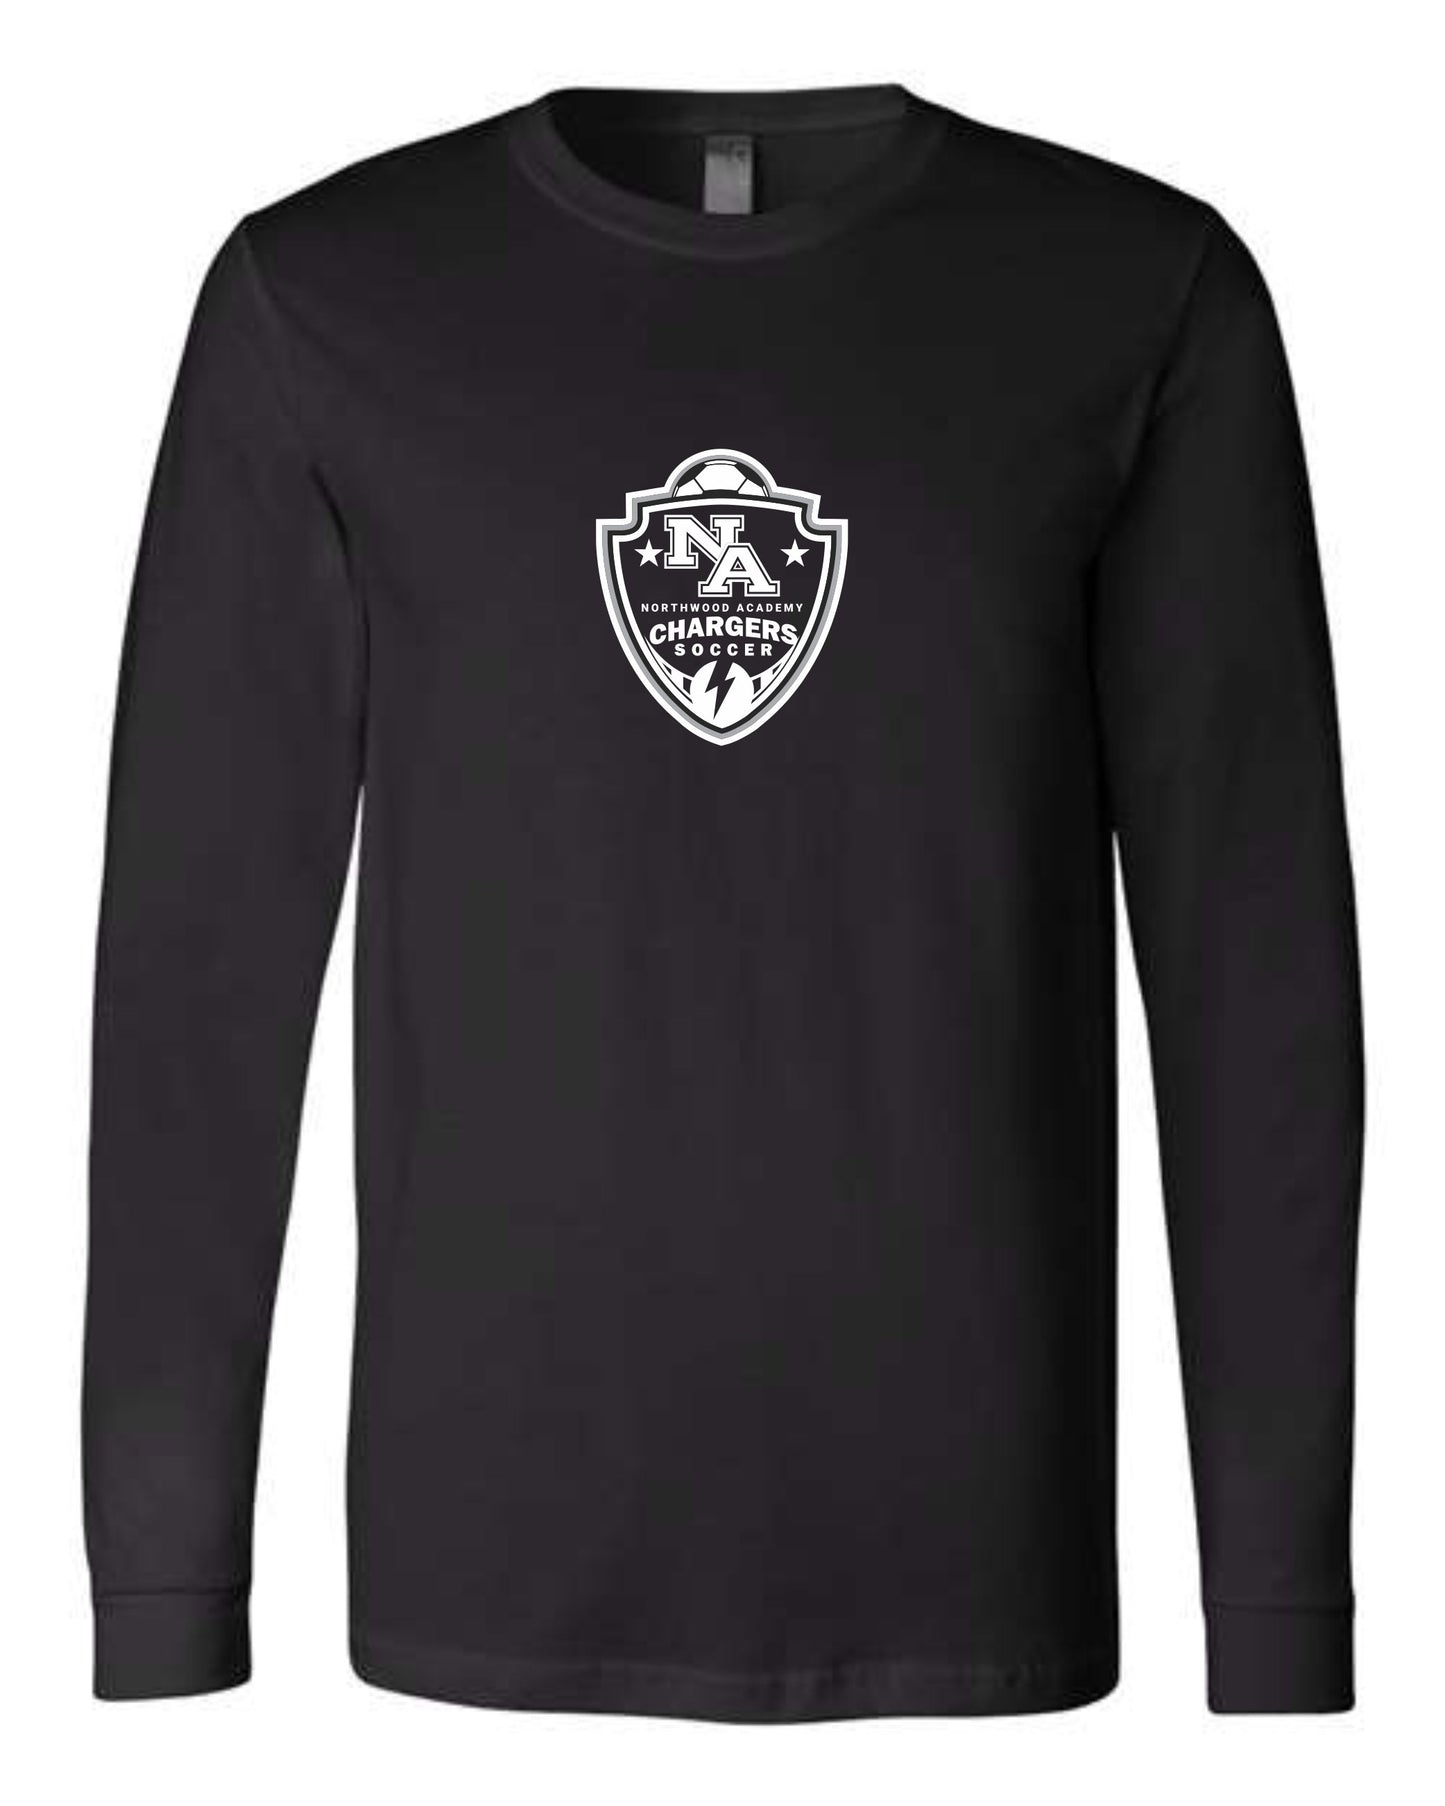 Long Sleeve Soccer Tee (not approved for school wear)